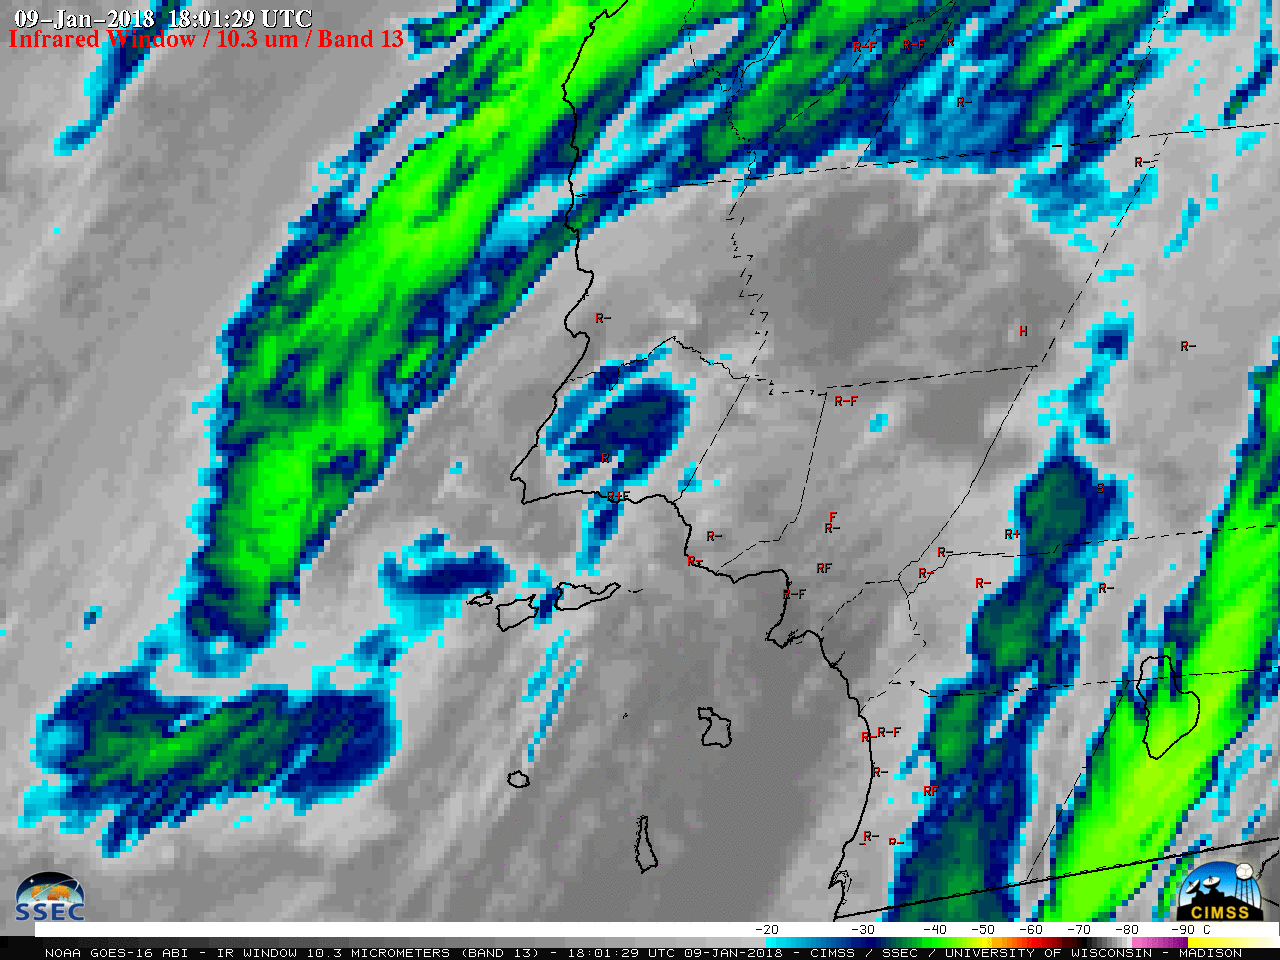 1-minute GOES-16 Infrared Window (10.3 µm) images; with hourly reports of surface weather type plotted in yellow [click to play MP4 animation]